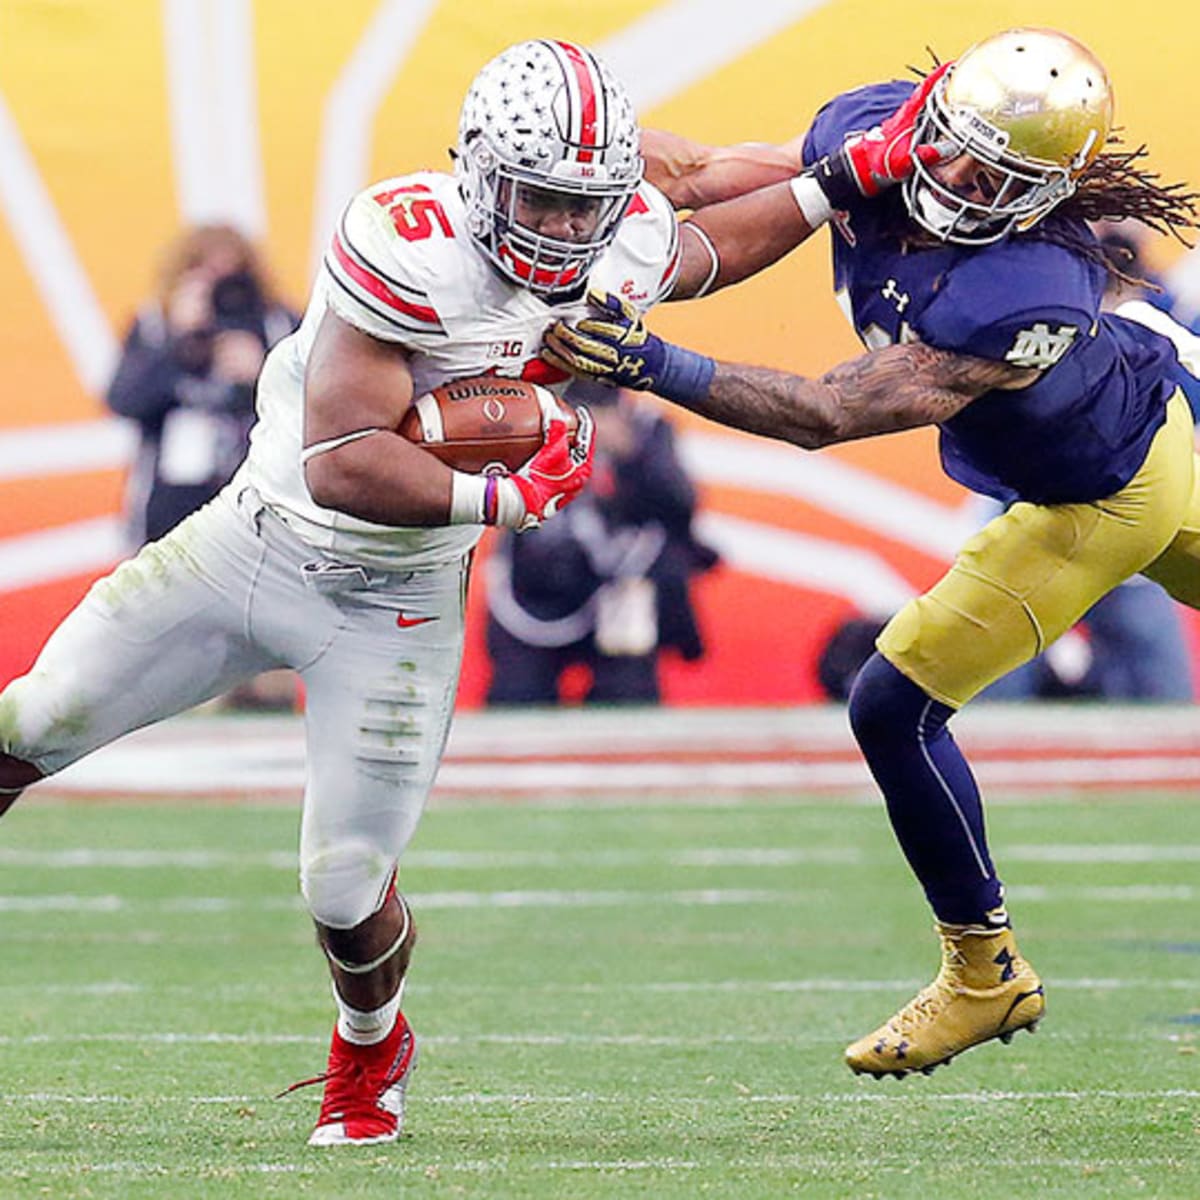 Ejected: Ohio State loses Joey Bosa 1st quarter, tweets apology